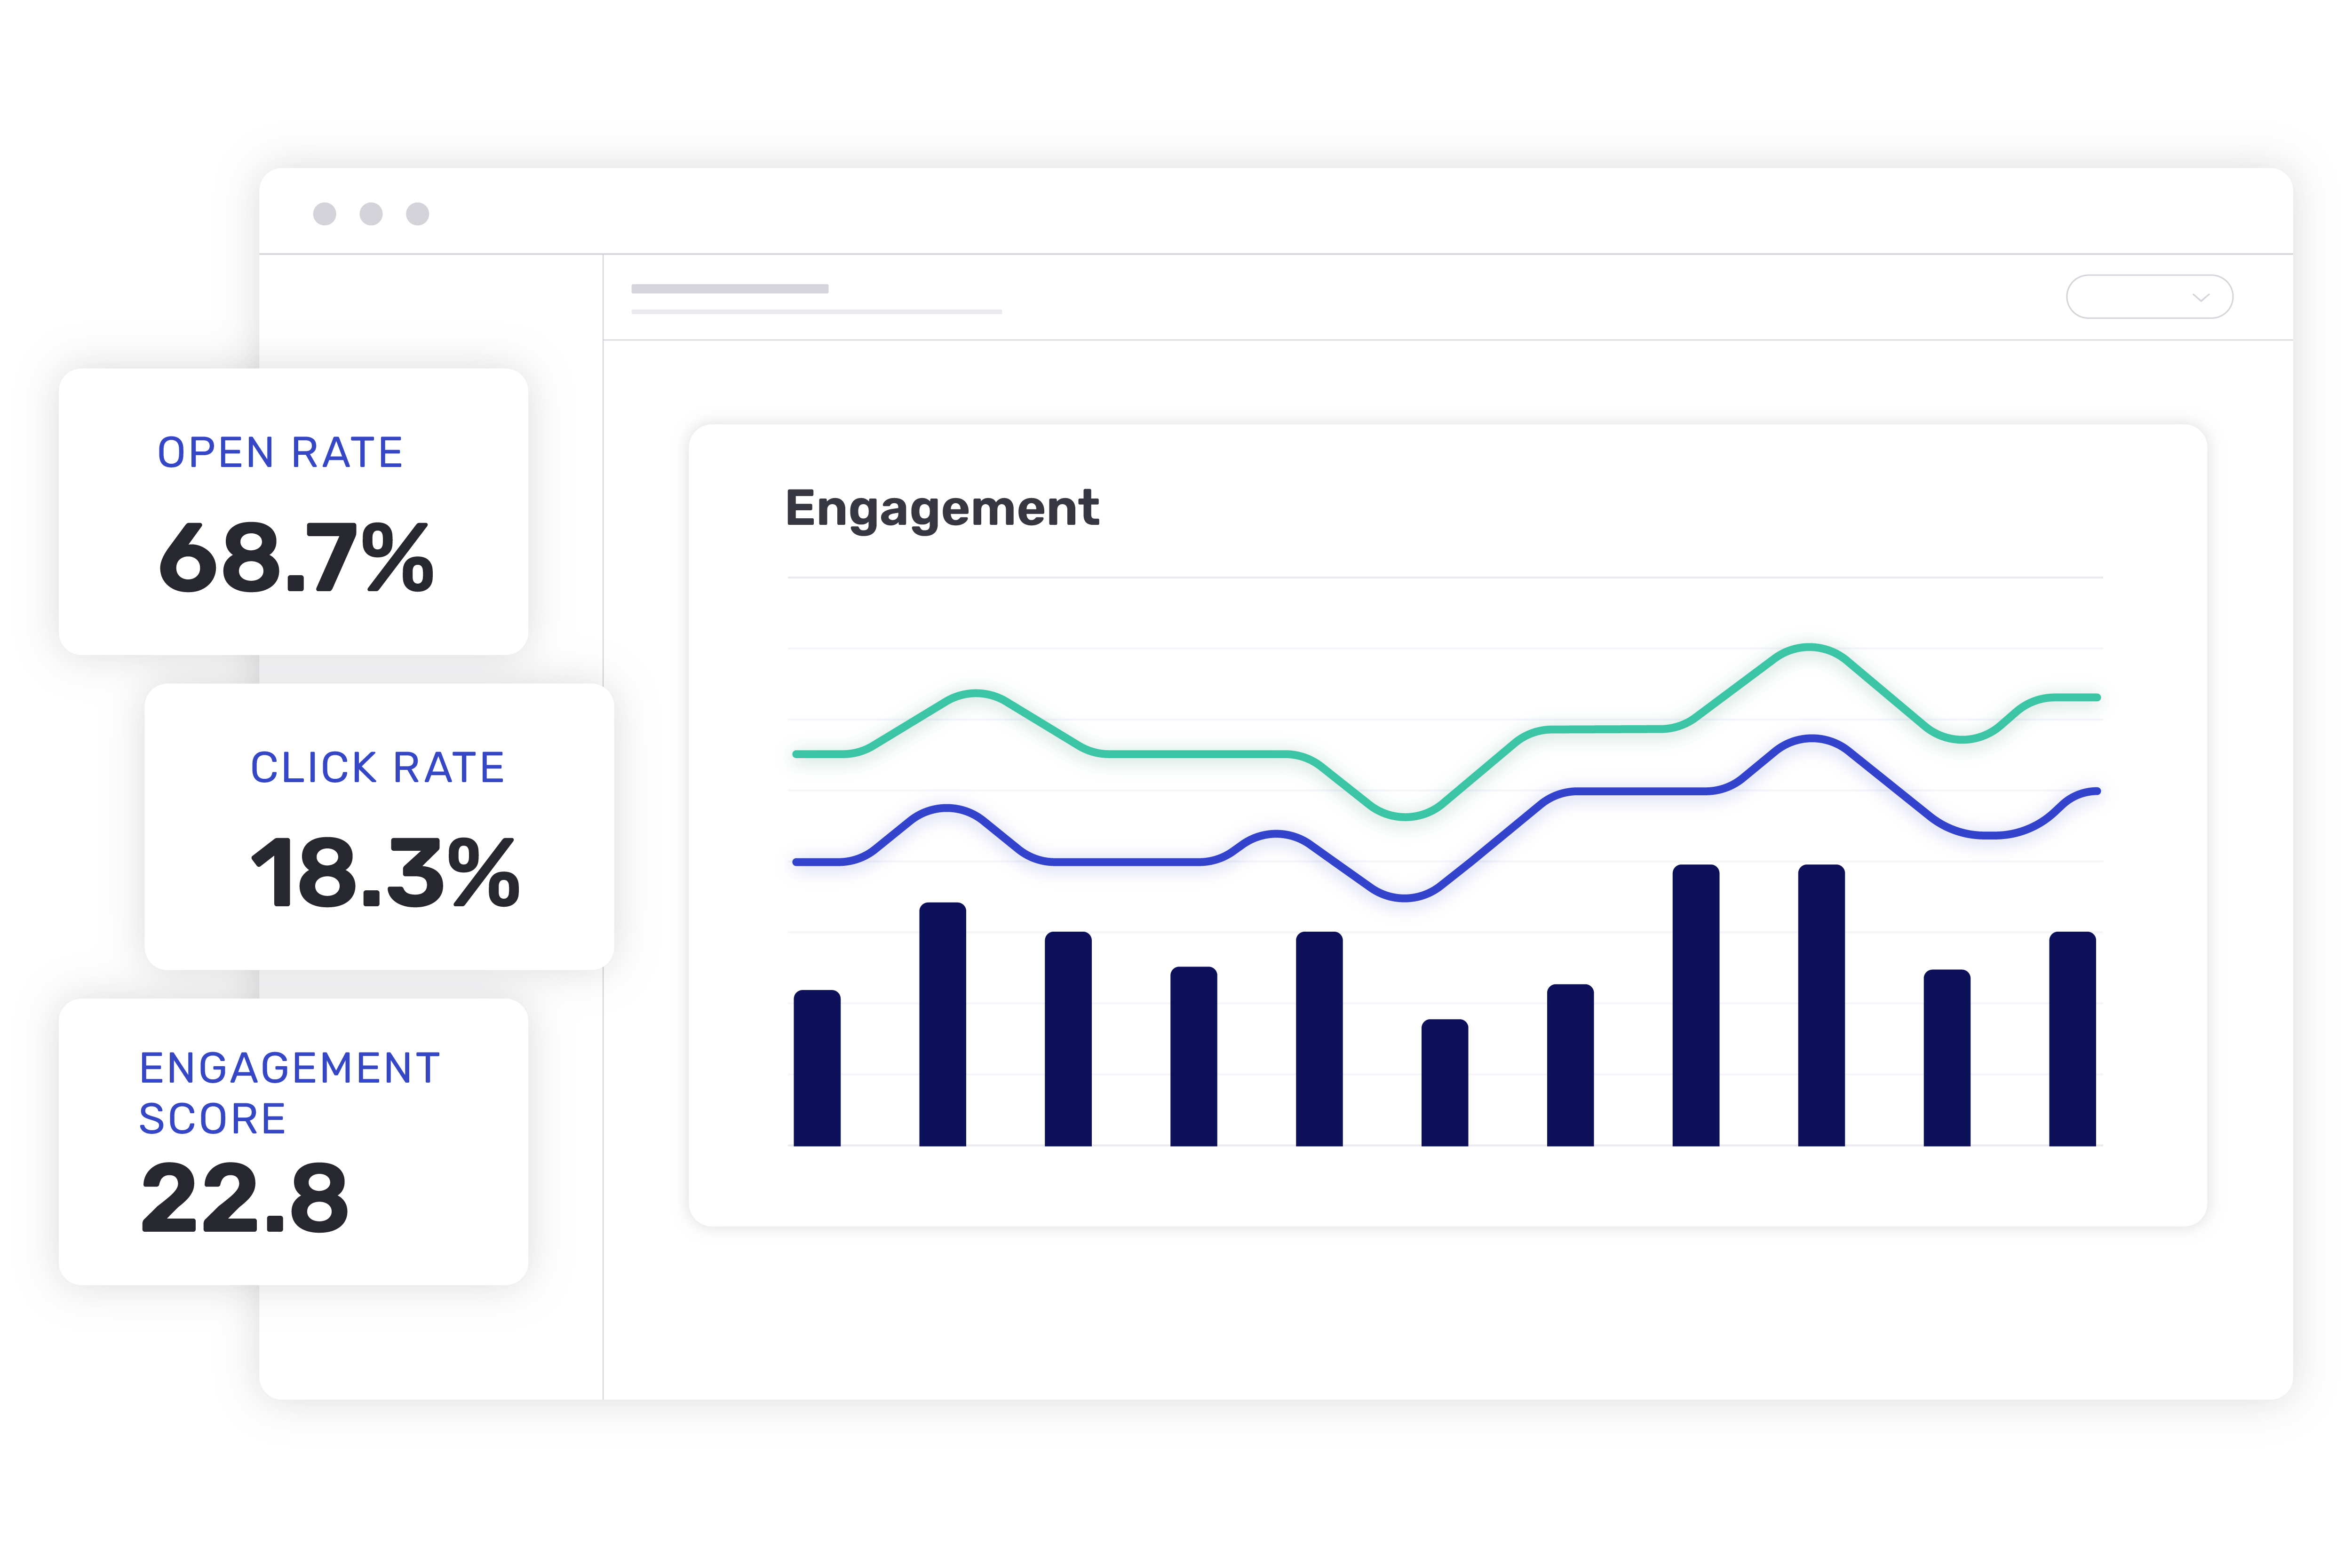 Engagement insight graphs show casing a 68.7% Open Rate, 18.3% Click Rate, 22.8% Engagement Score